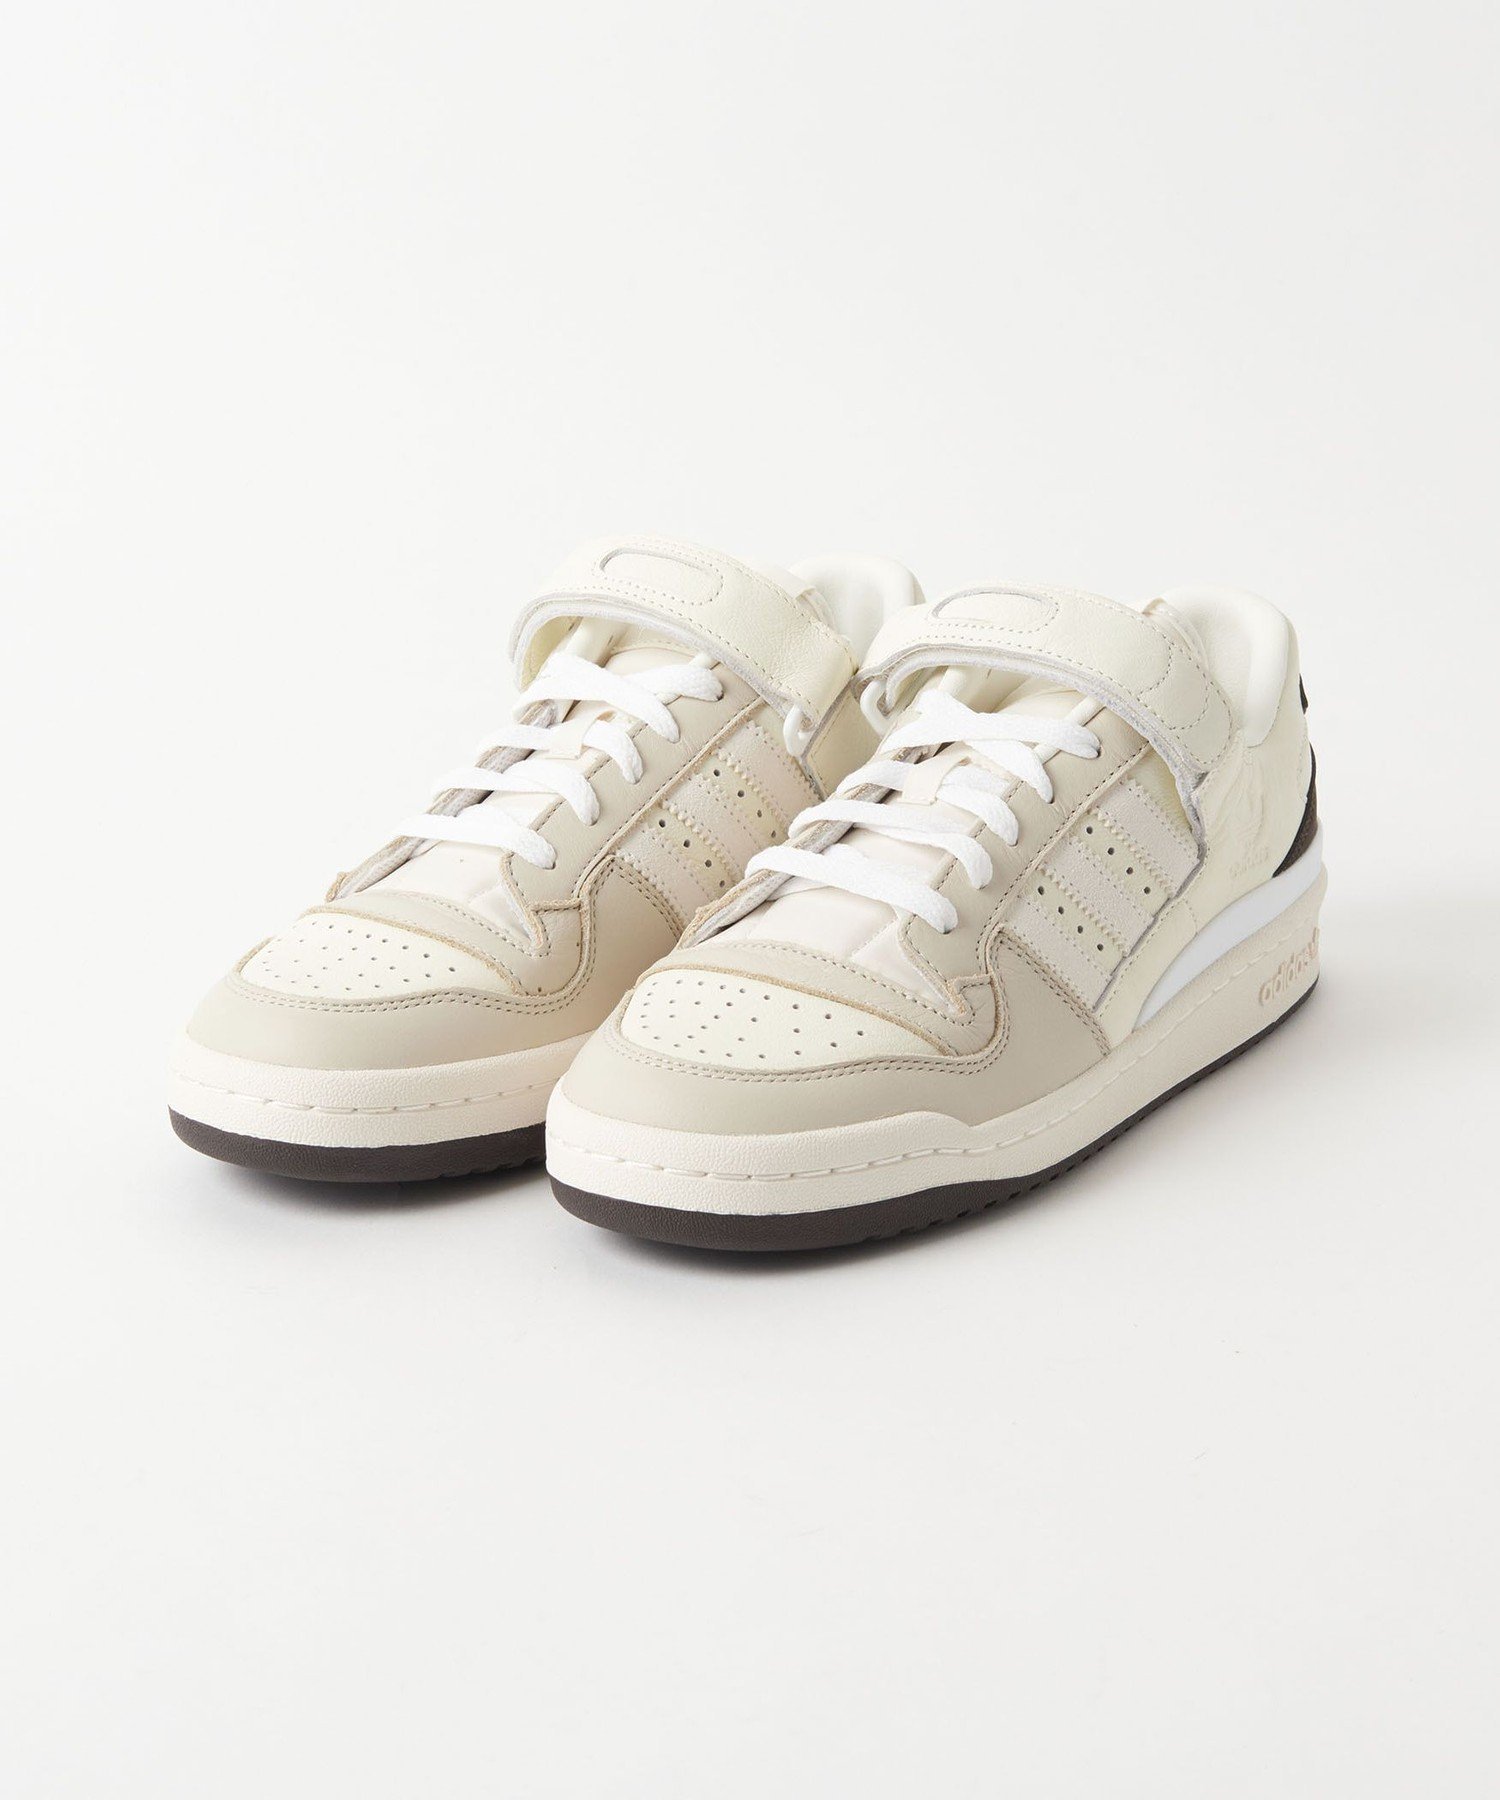 BEAUTY&YOUTH UNITED ARROWS｜【別注】<adidas Originals>FORUM84 LOW